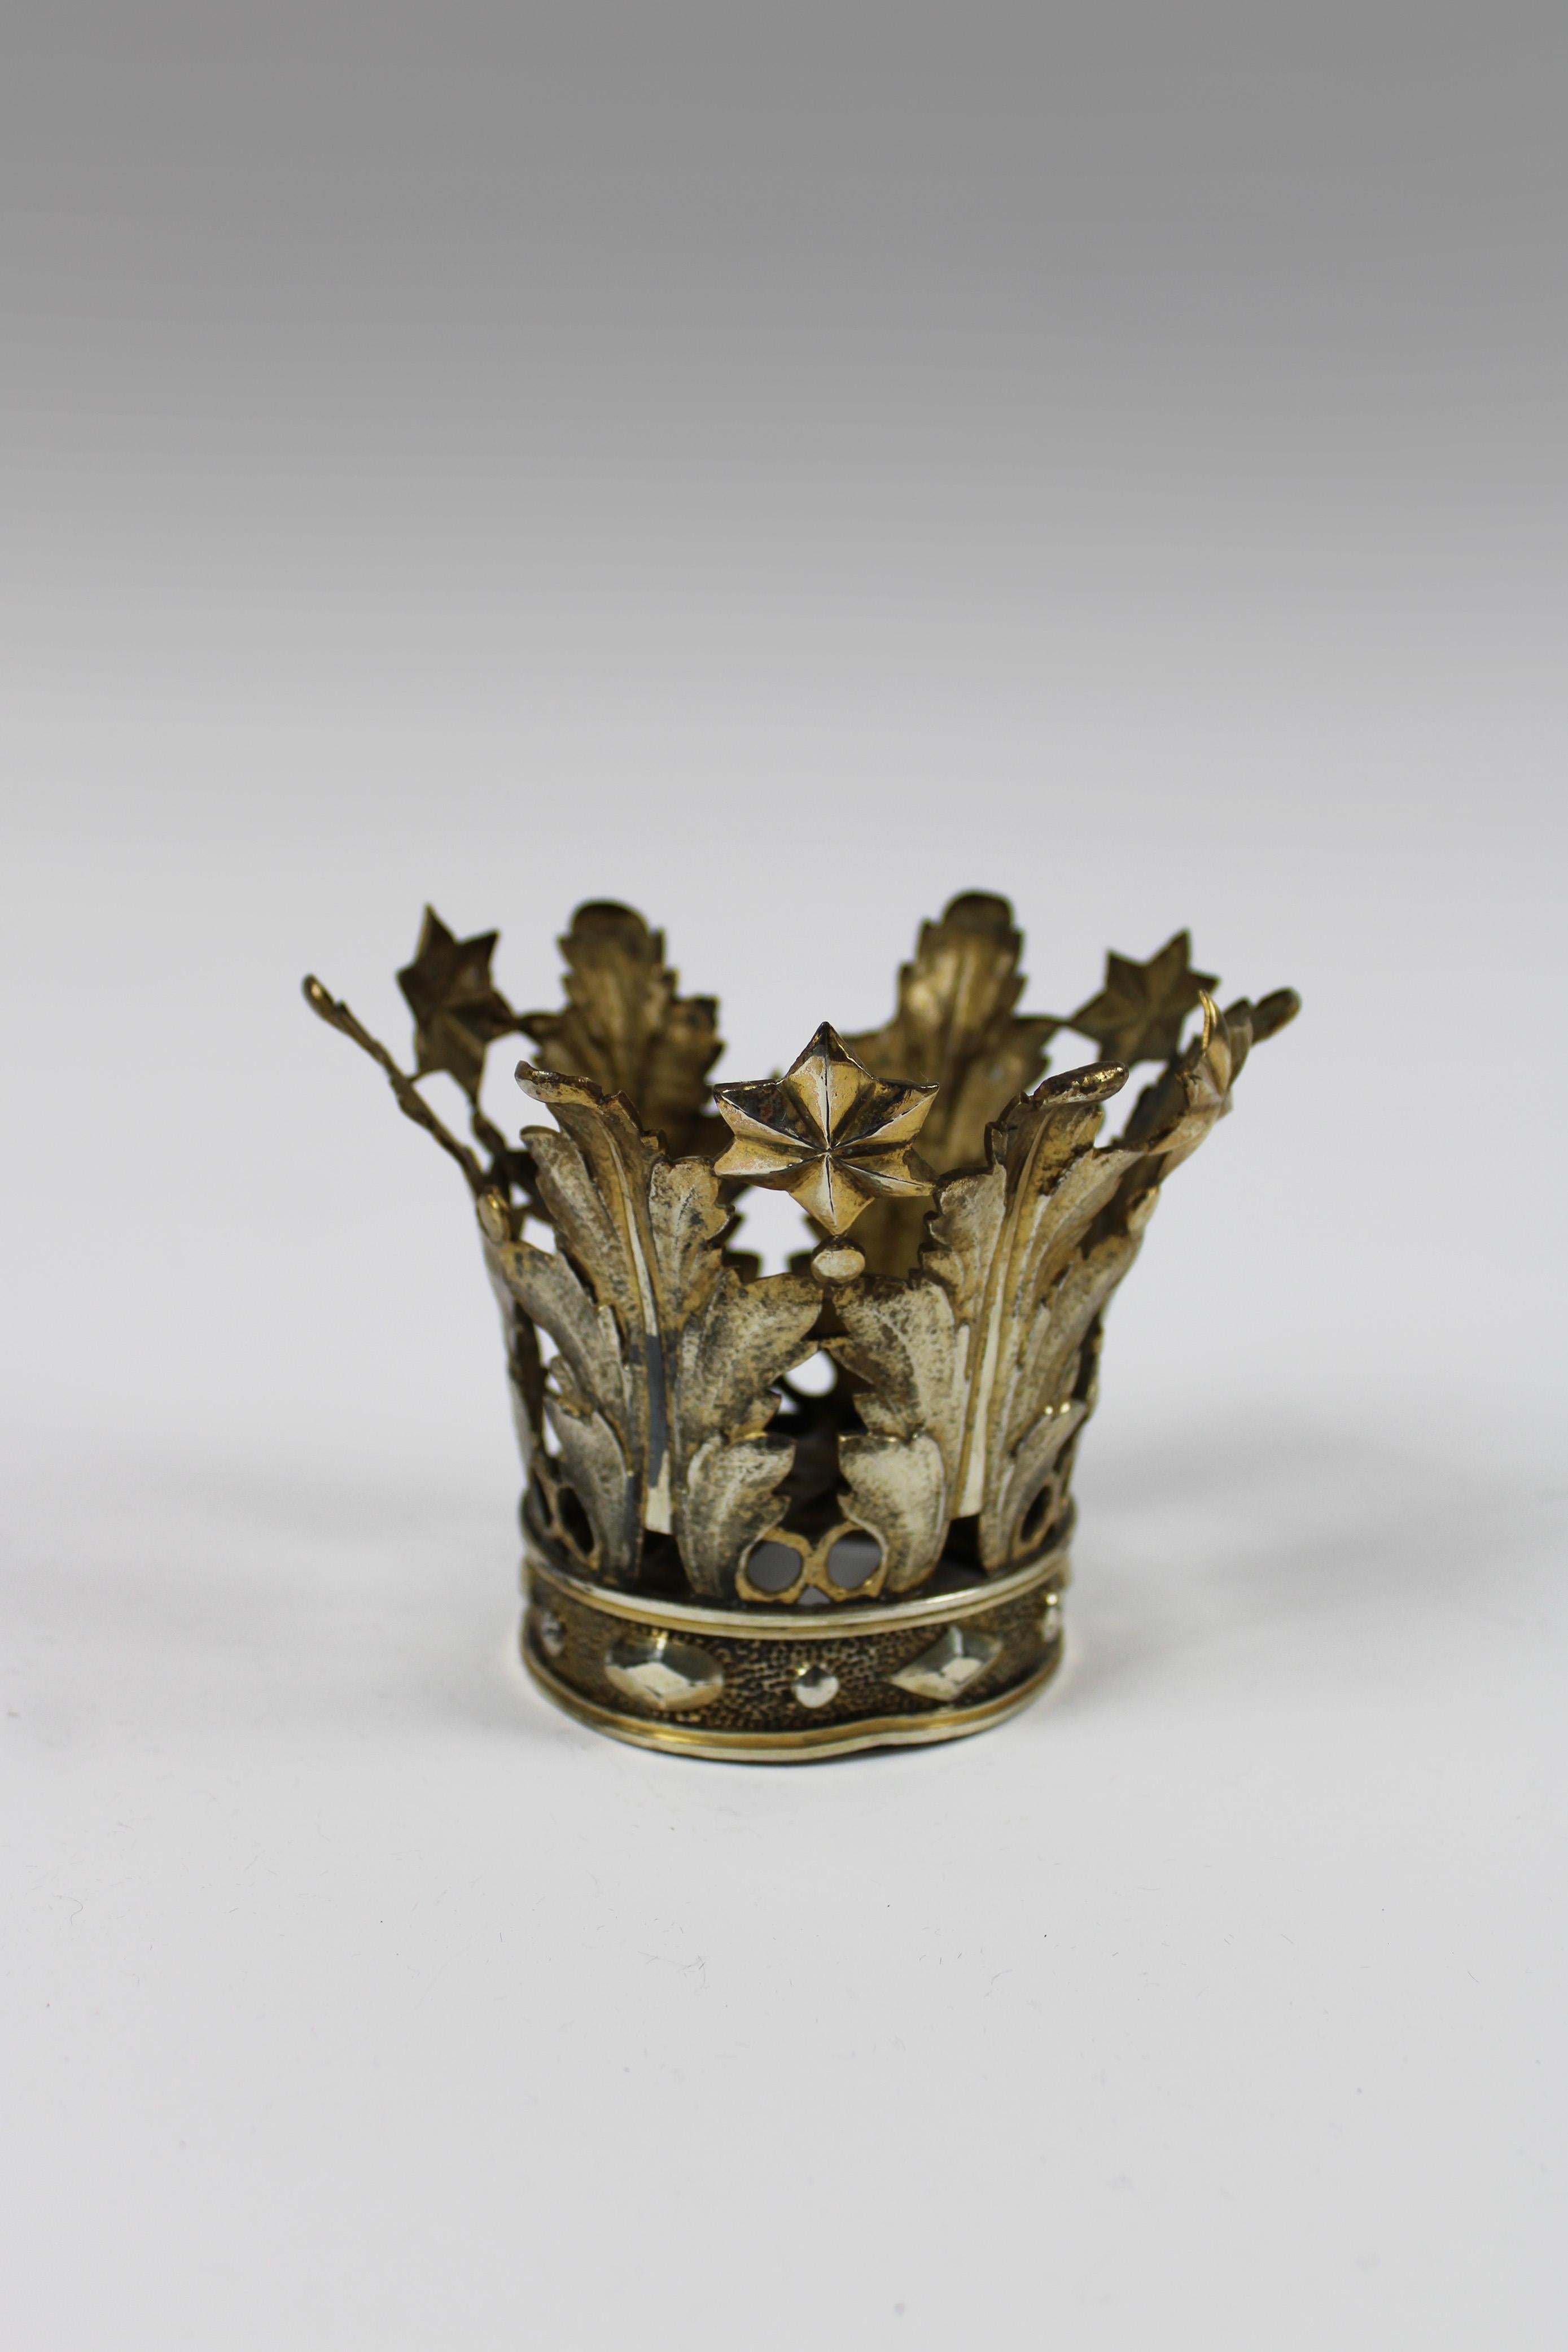 Crafted from luxurious Vermeille Silver, this exquisite religious artifact hails from Flanders, where it once adorned the sacred statue of Maria. Adorned with intricate acanthus leaves and stars, the crown exudes a celestial aura of elegance and